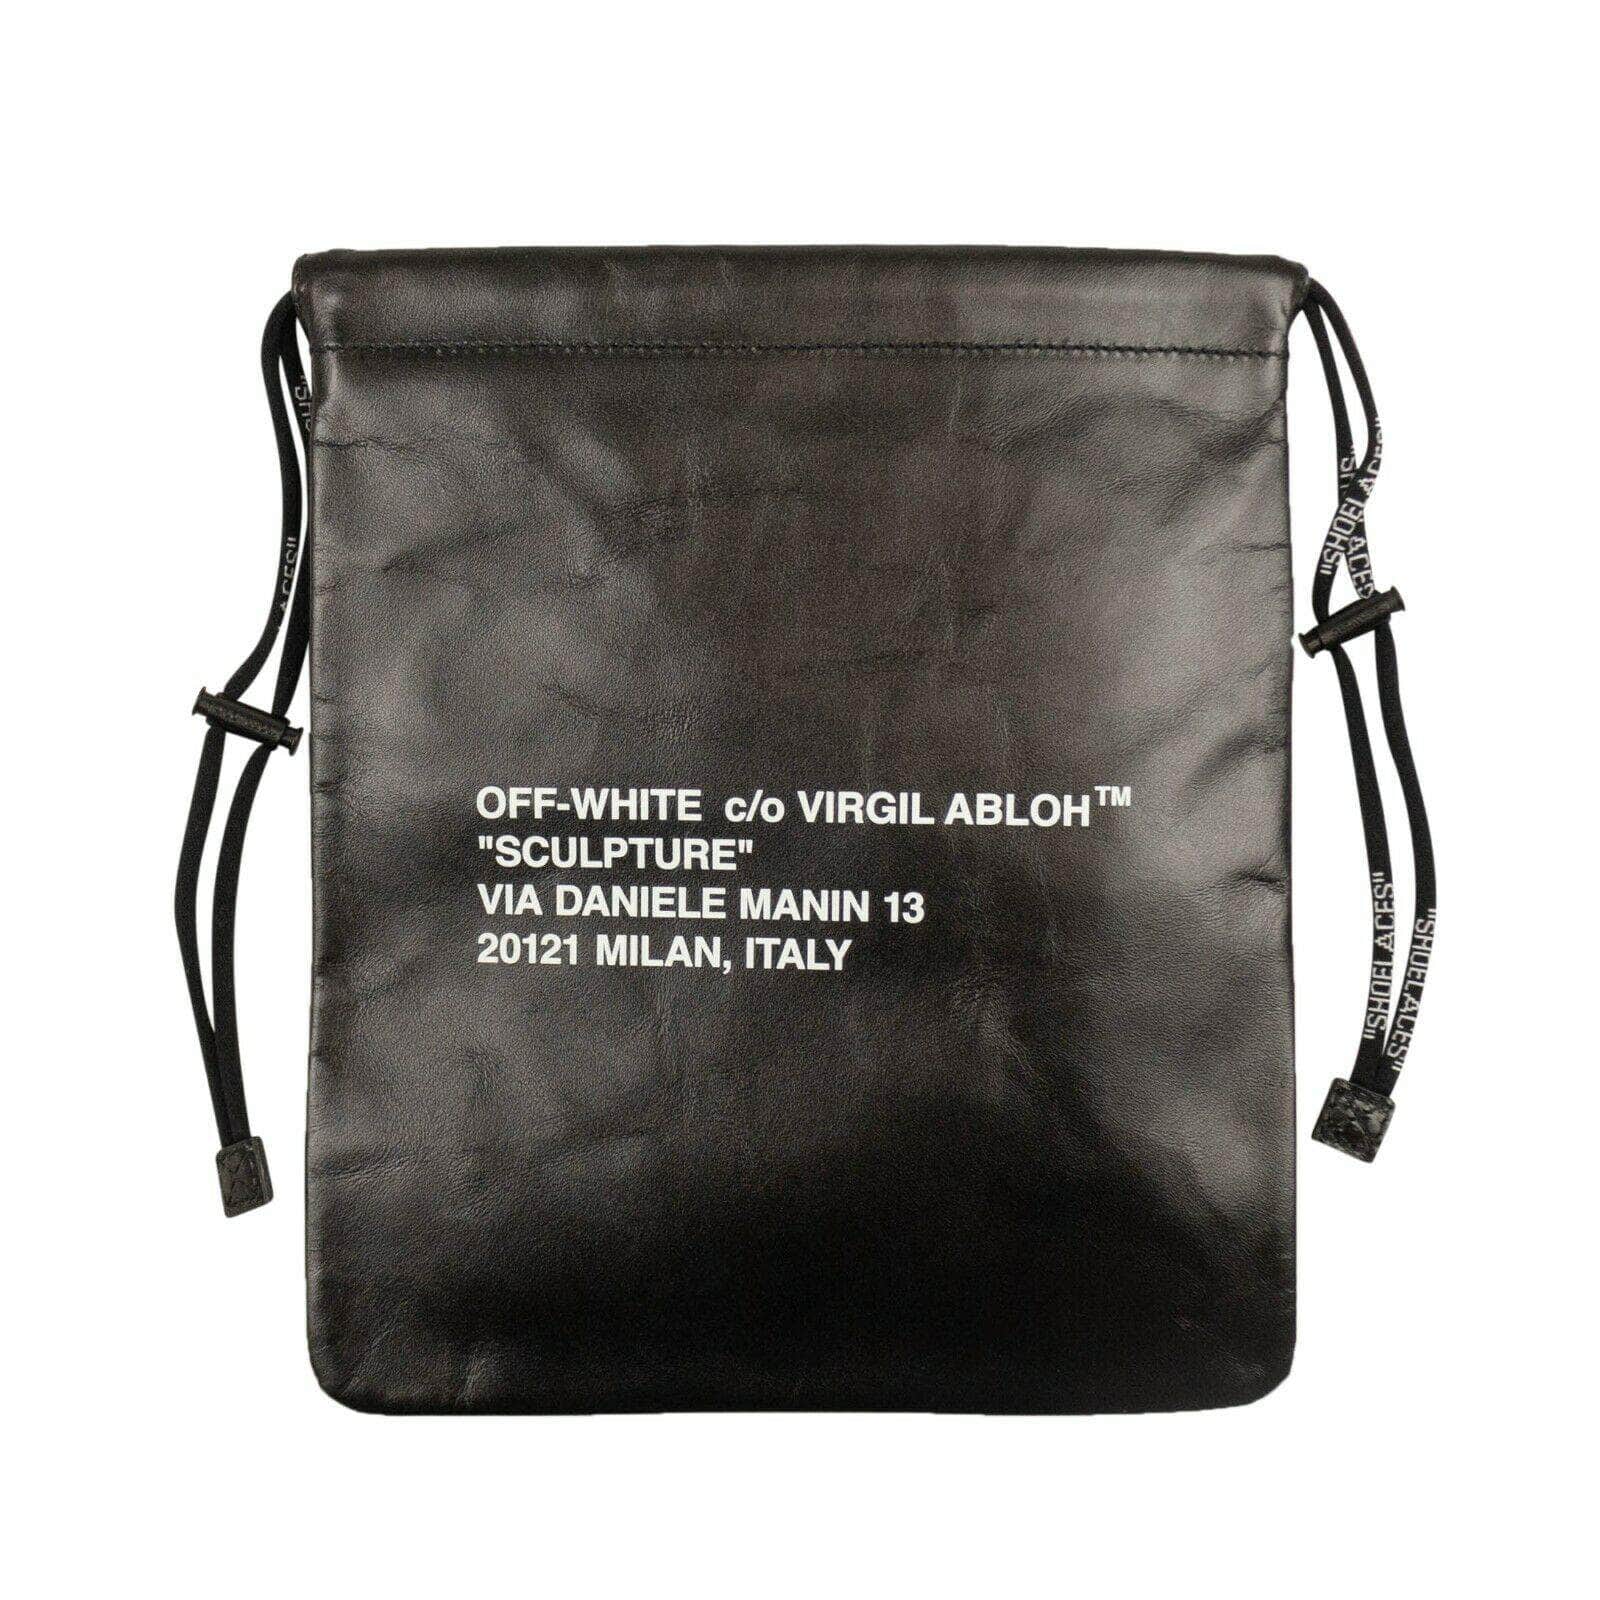 OFF-WHITE c/o VIRGIL ABLOH 250-500, channelenable-all, chicmi, couponcollection, gender-womens, main-handbags, off-white-c-o-virgil-abloh, size-os OS Black Leather Drawstring Bag 82NGG-OW-3500 82NGG-OW-3500